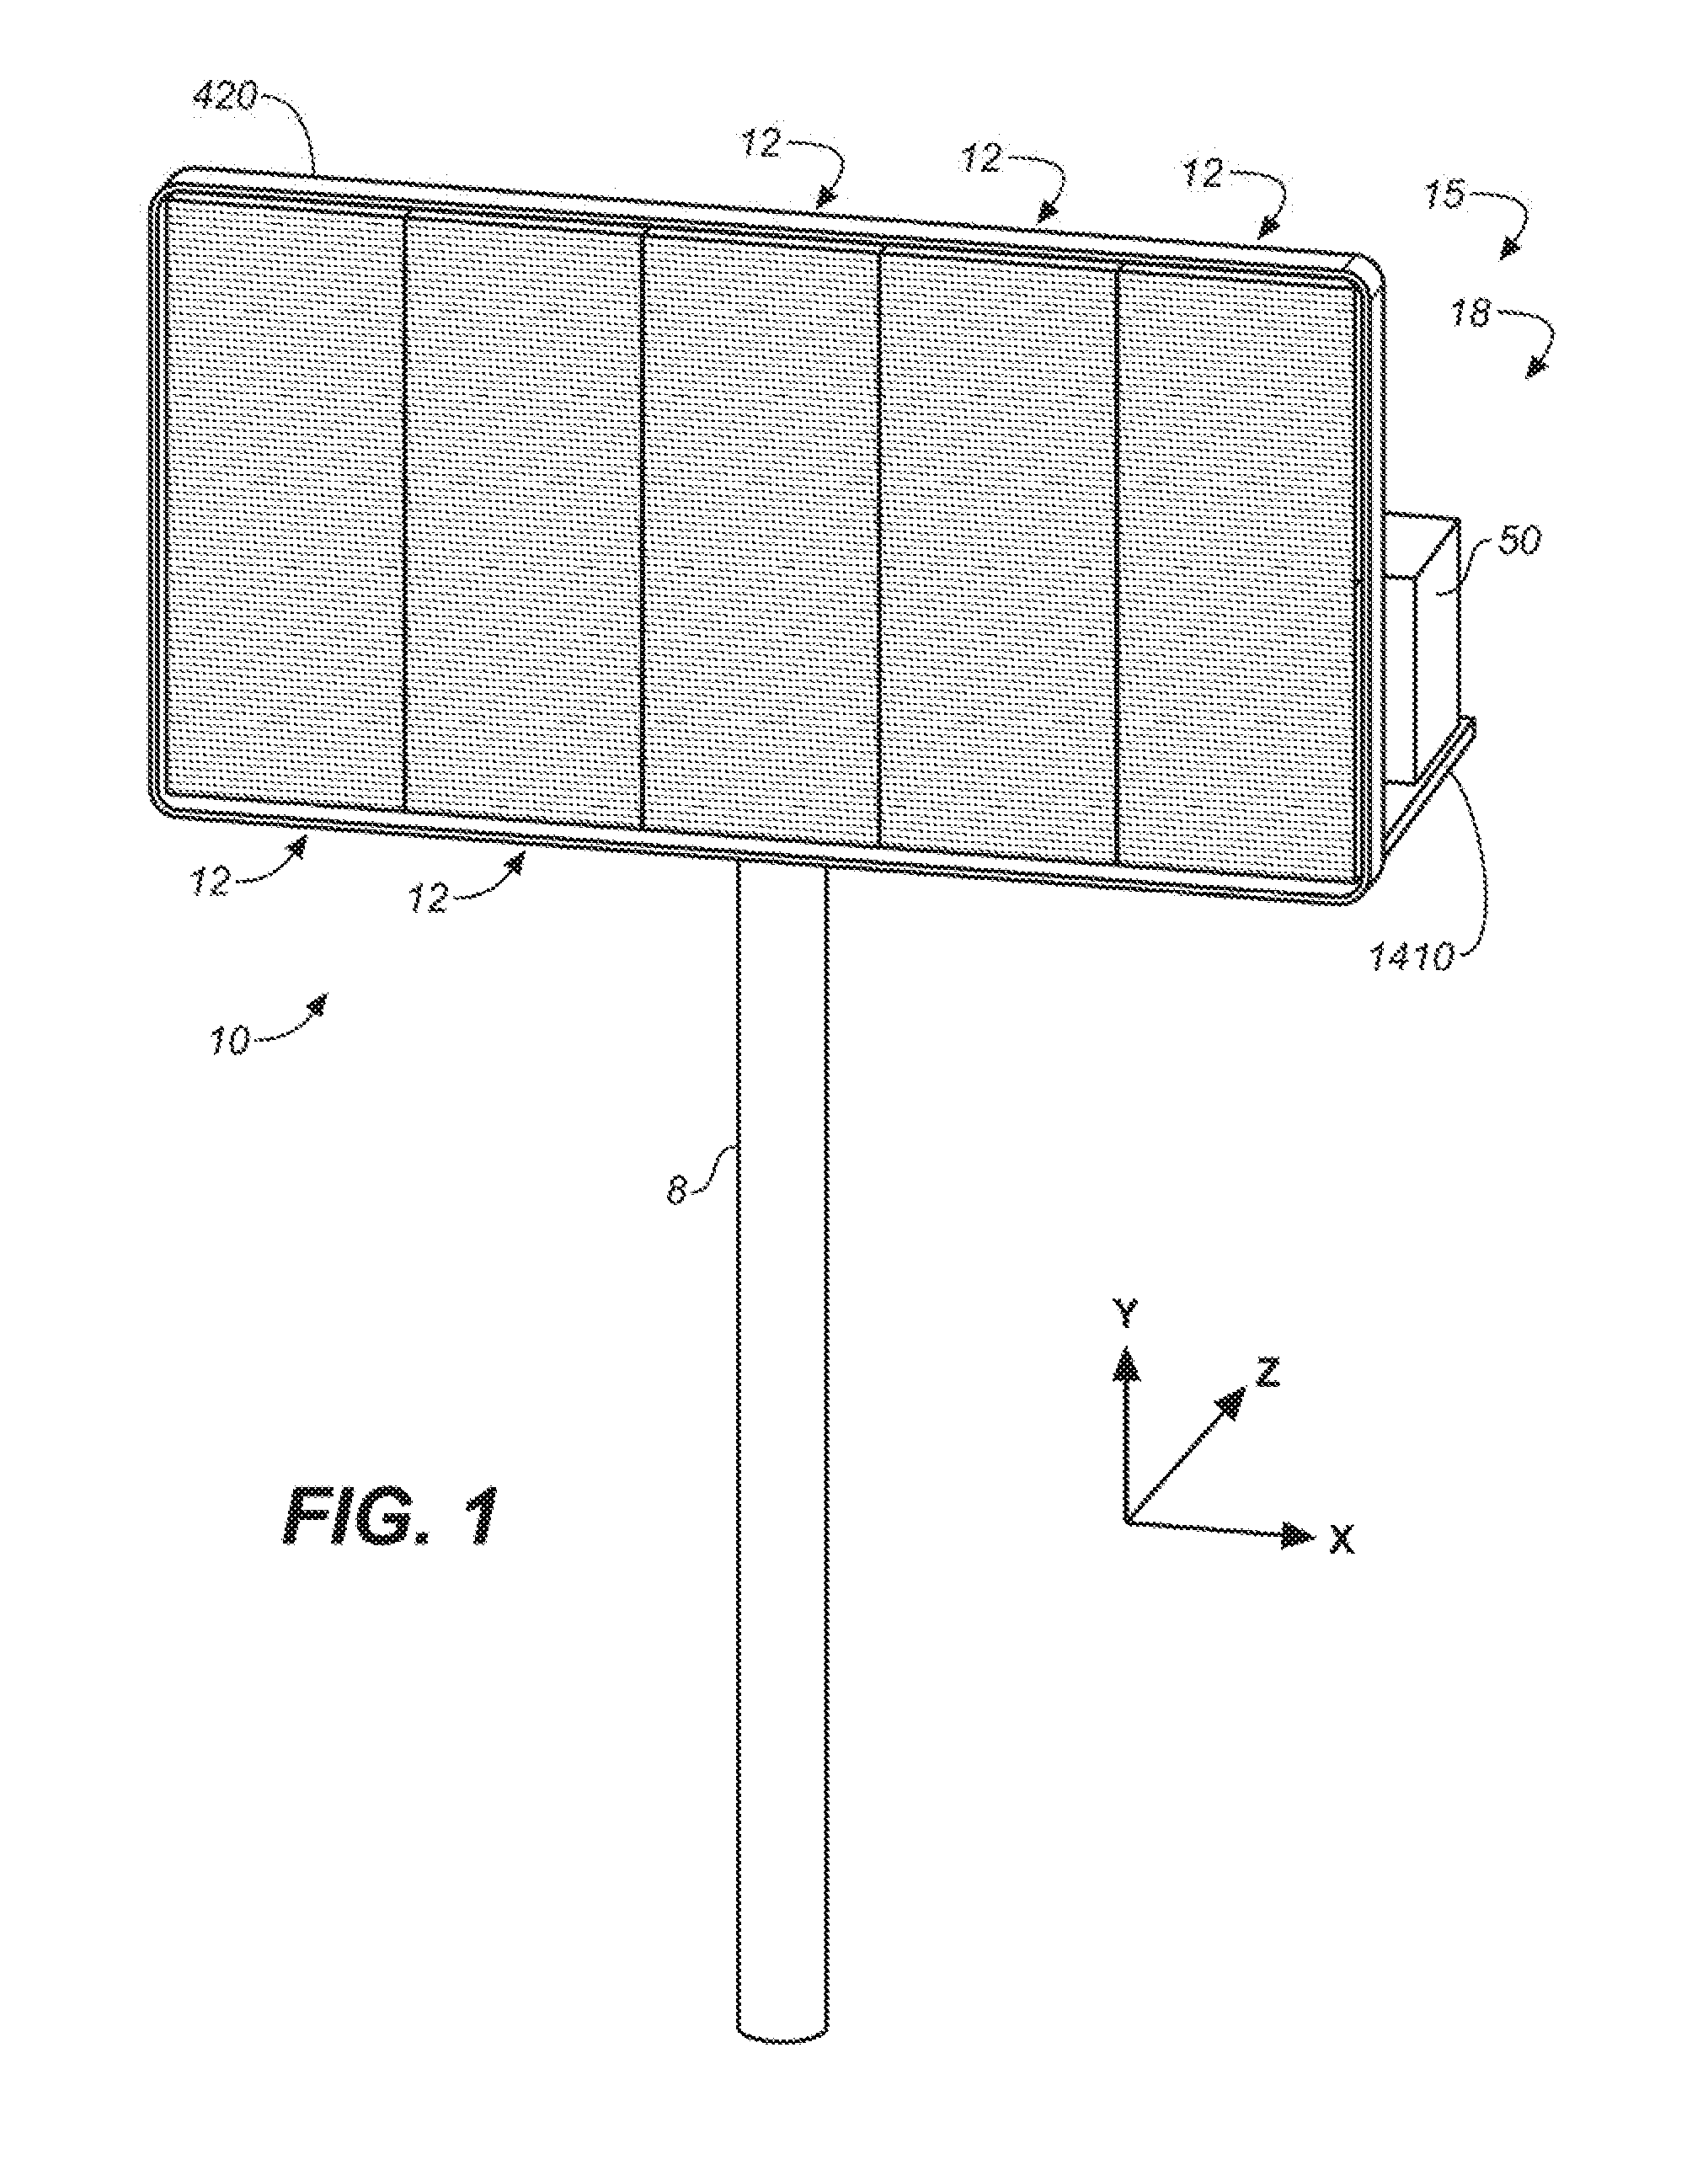 Customized sectional sign assembly kit and method of using kit for constructon and installation of same